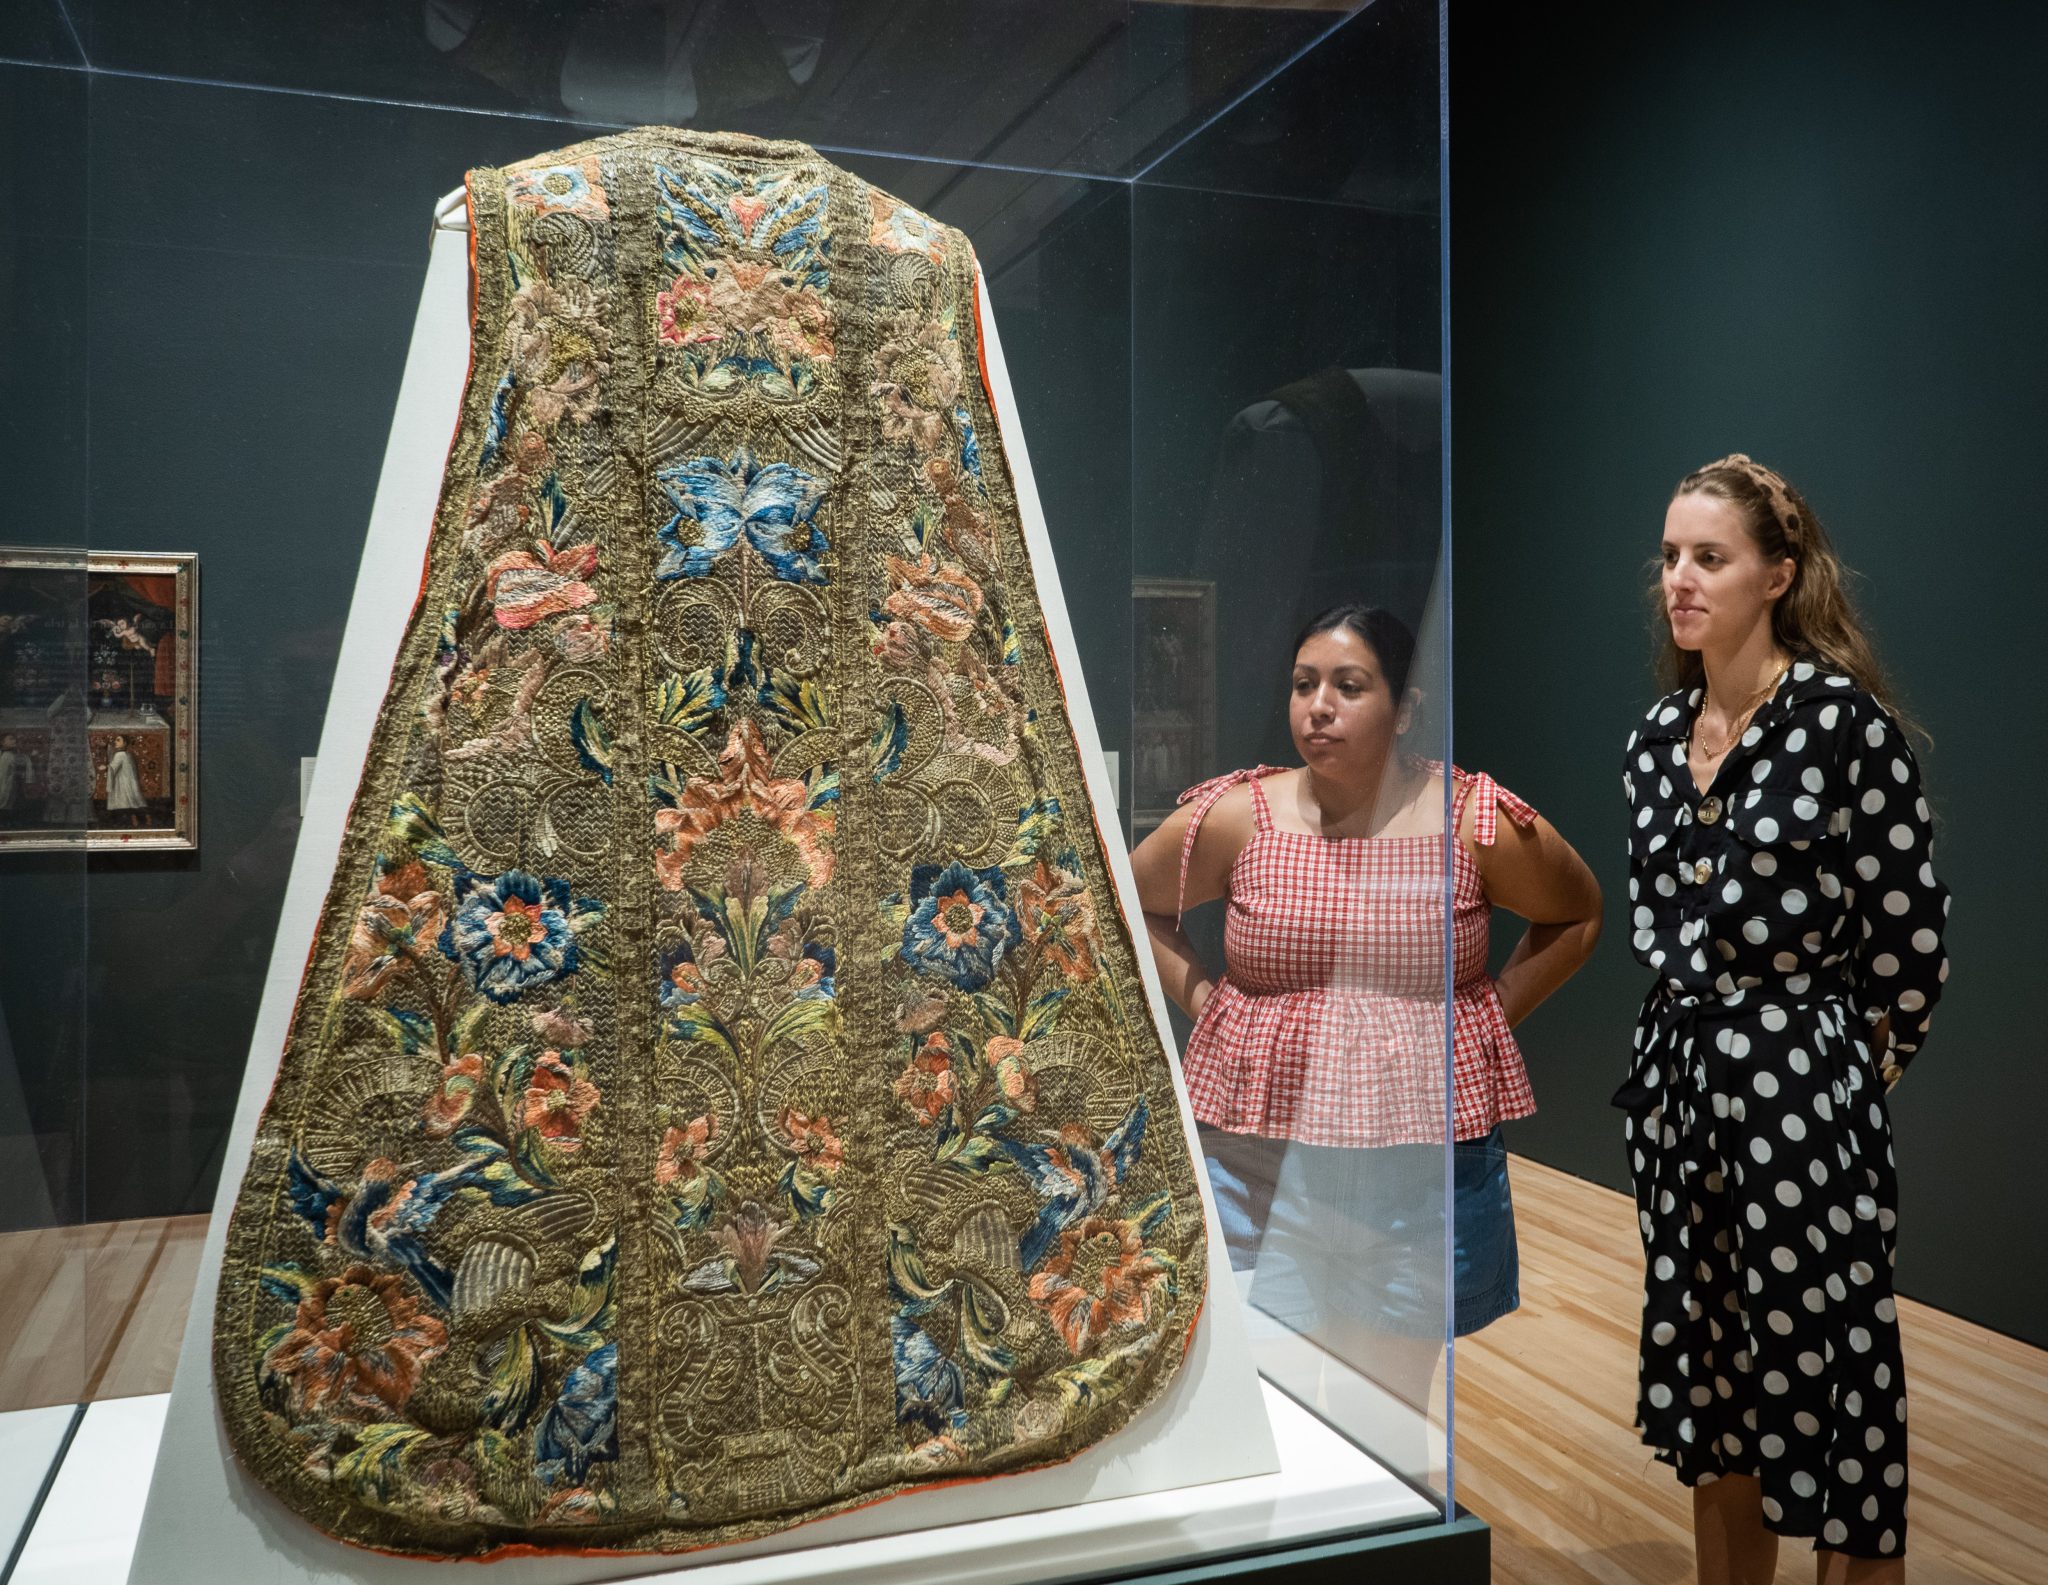 Exhibit: “Painted Cloth: Fashion and Ritual in Colonial Latin America”